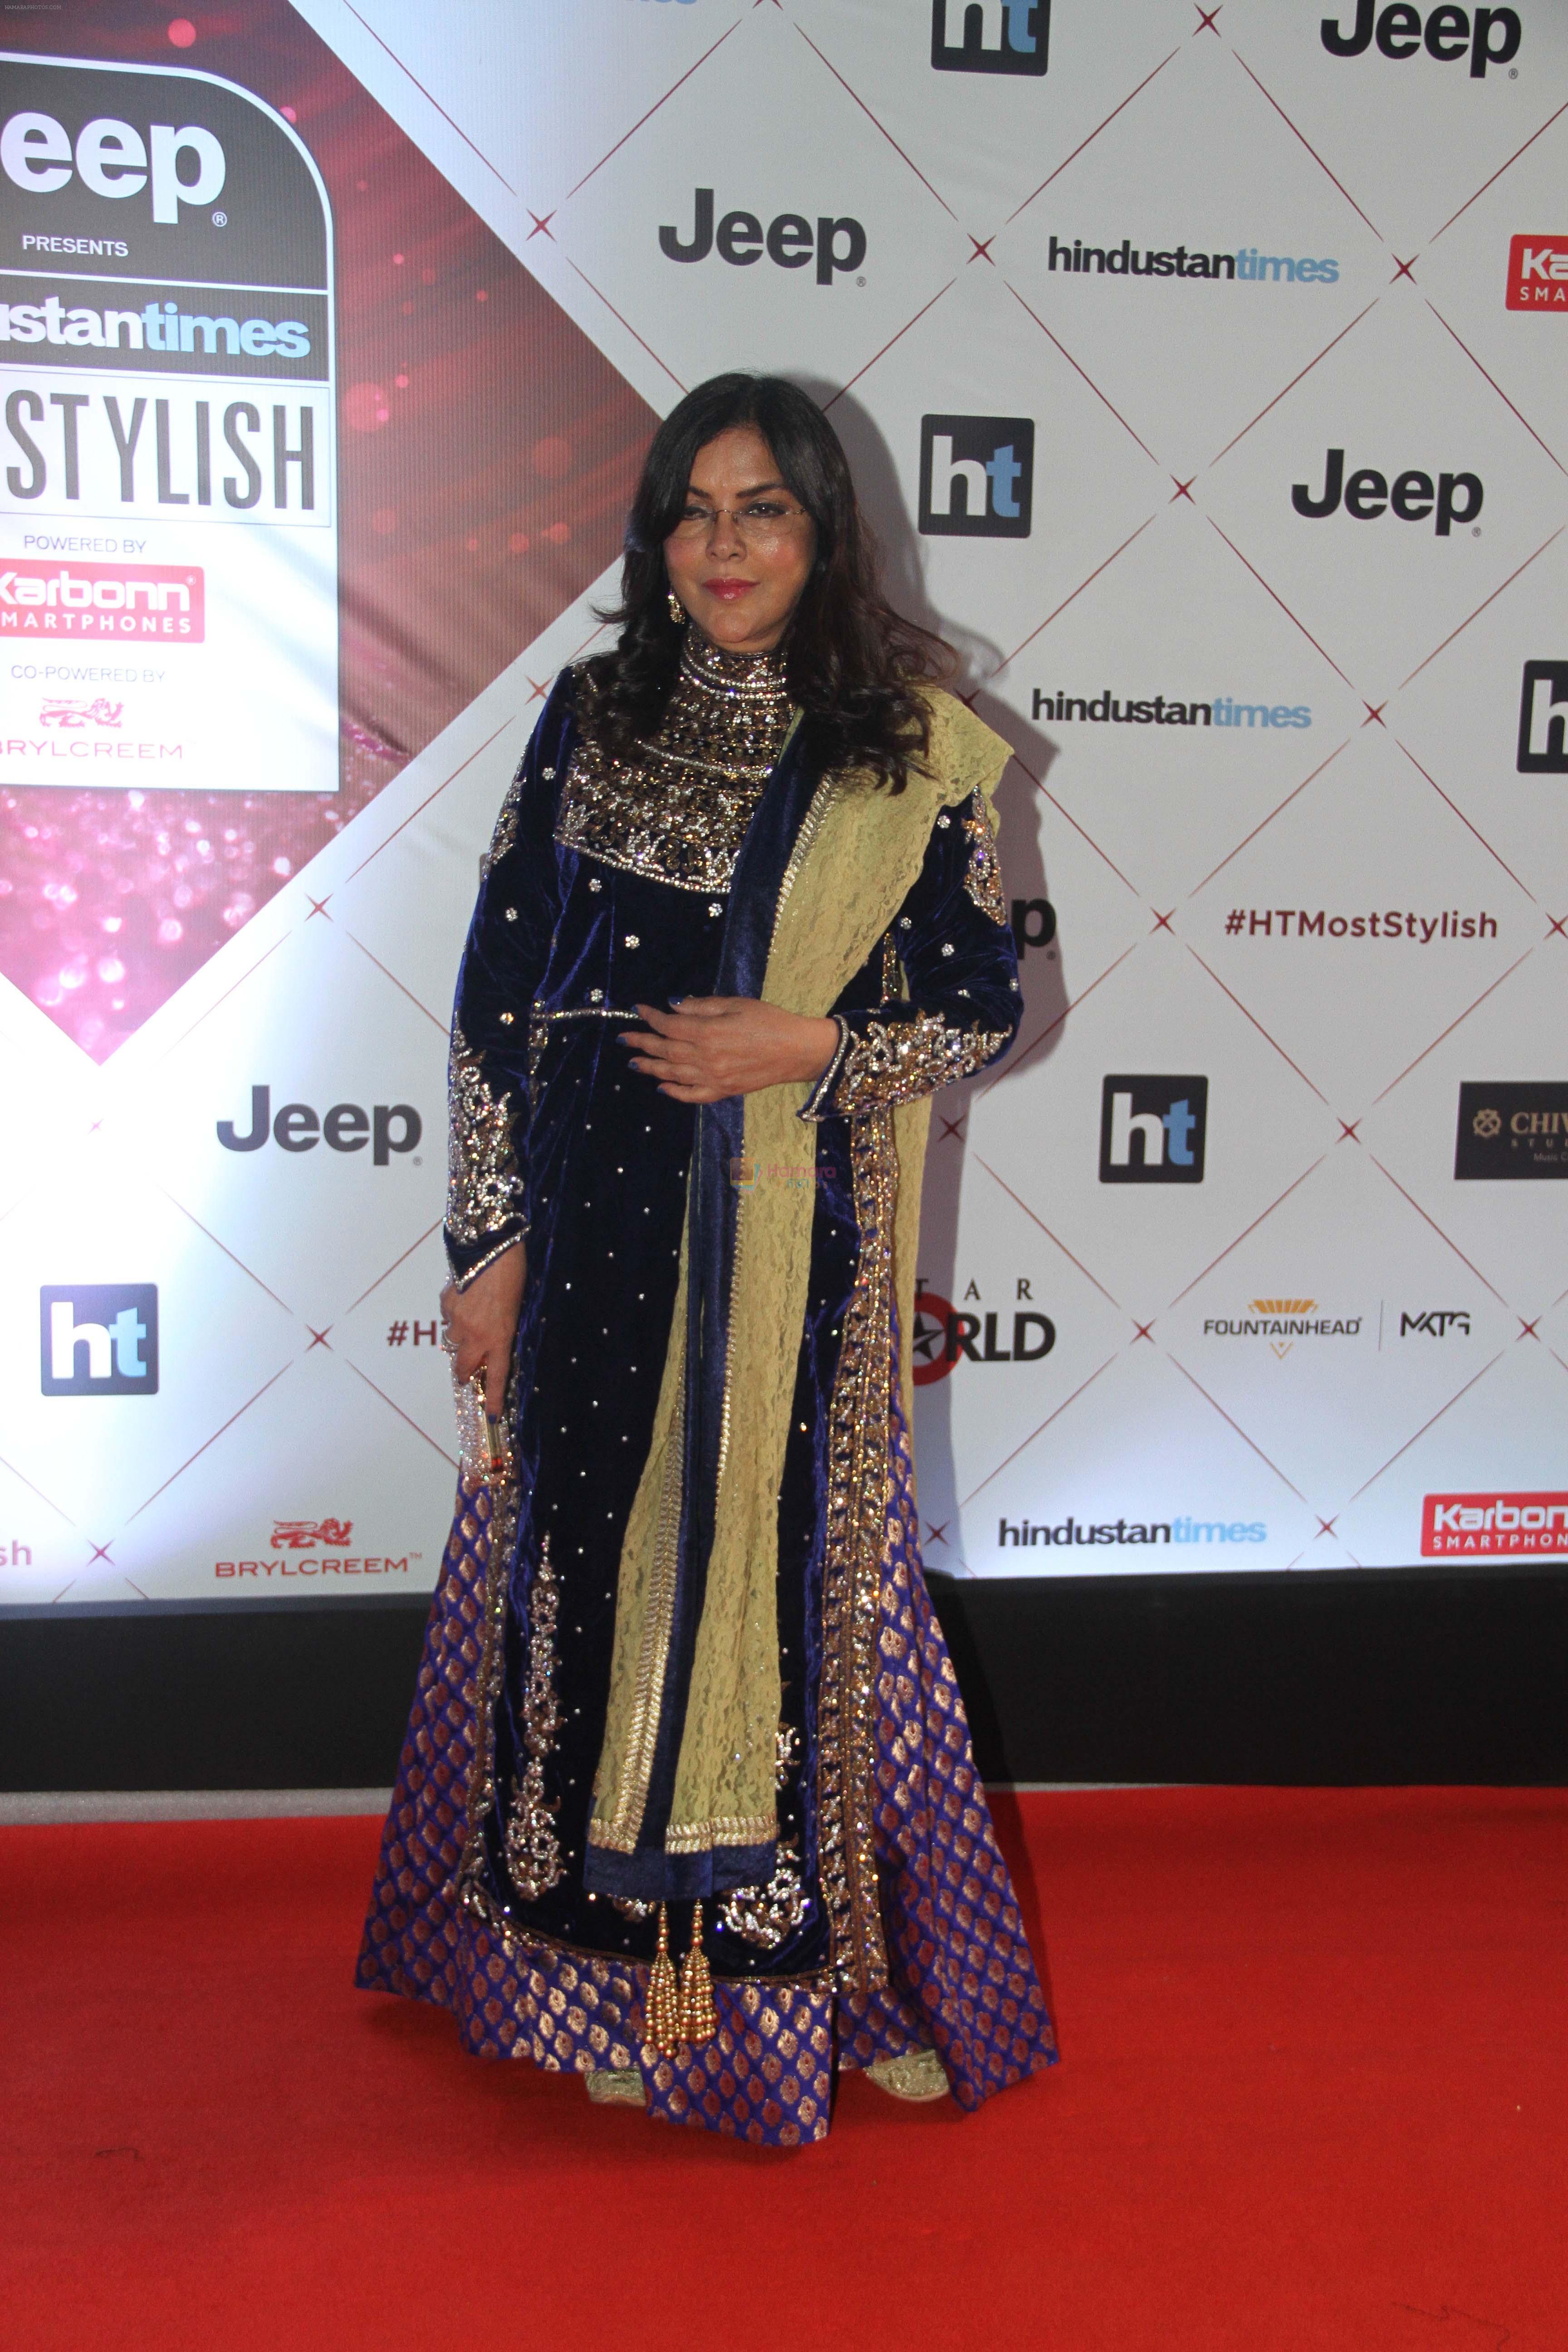 Zeenat Aman at the Red Carpet Of Ht Most Stylish Awards 2018 on 24th Jan 2018